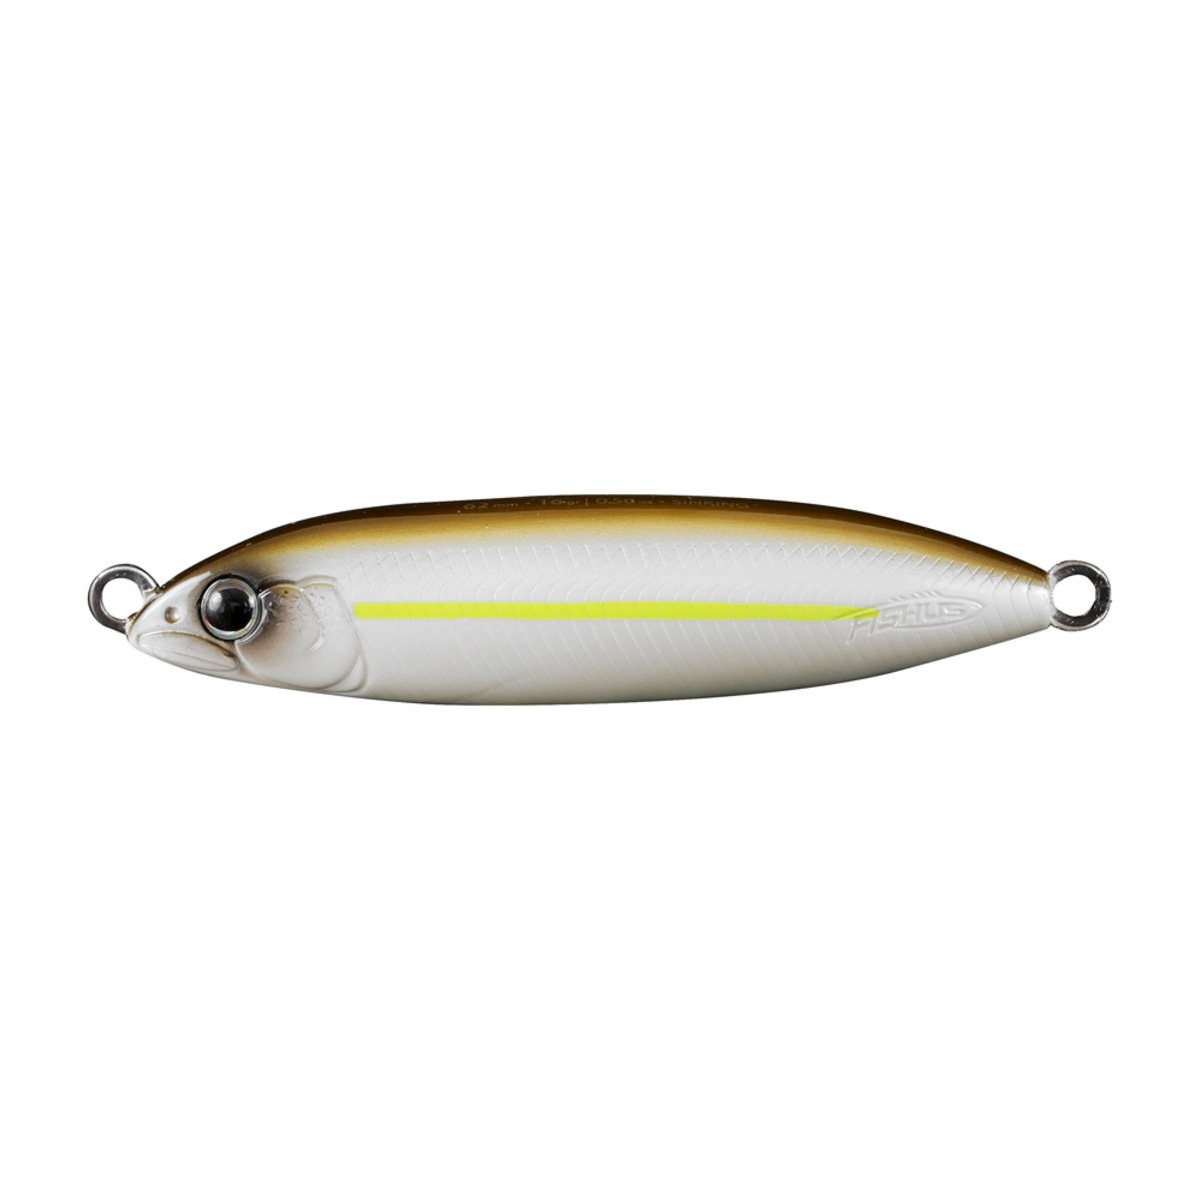 Fishus Wobly 62 - Sexy Shad